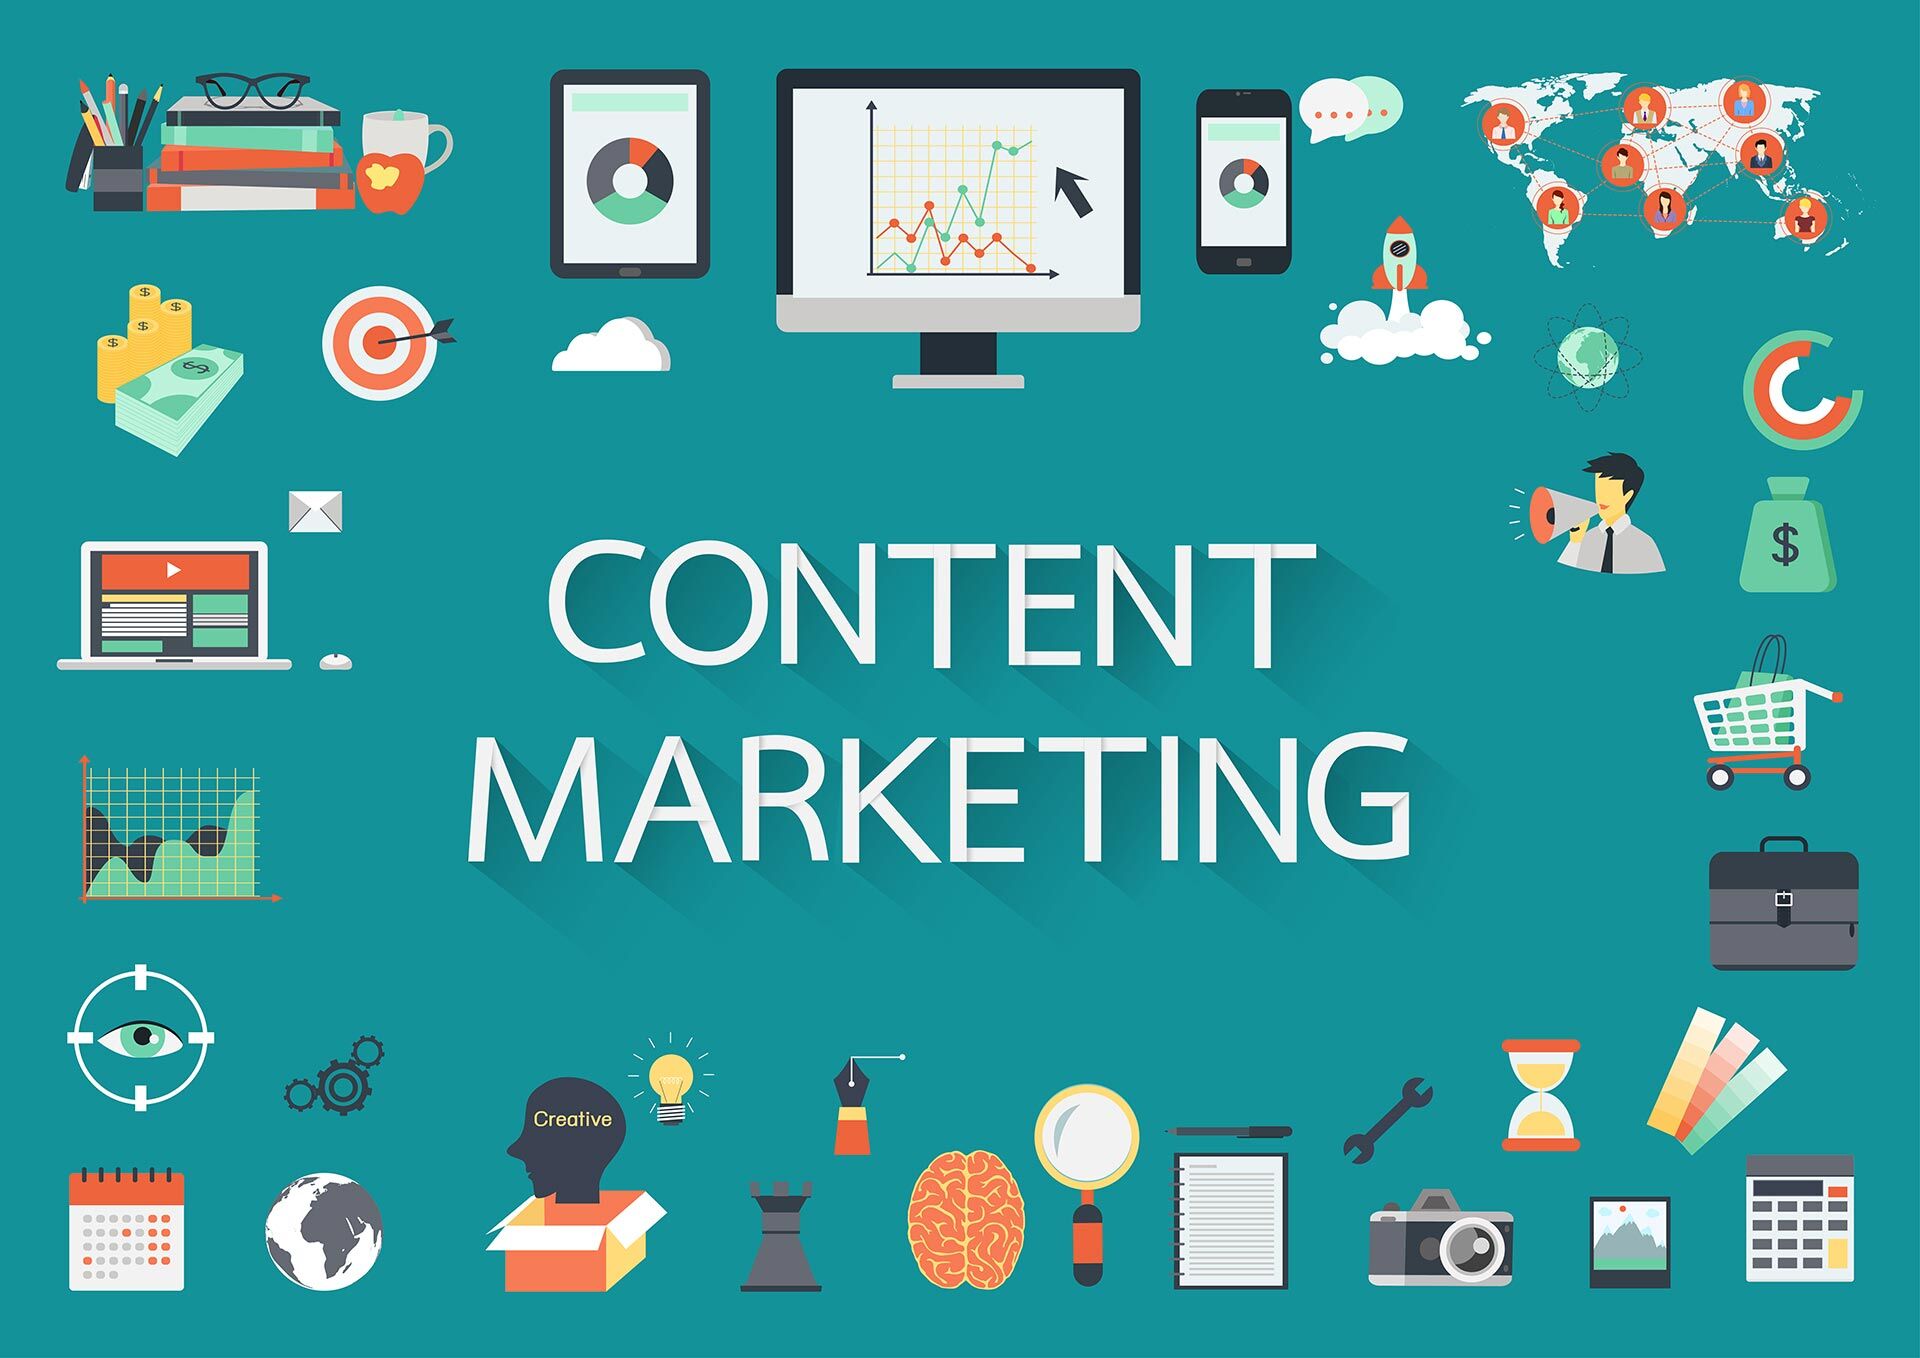 11 Content Marketing Tips For Financial Services Brands